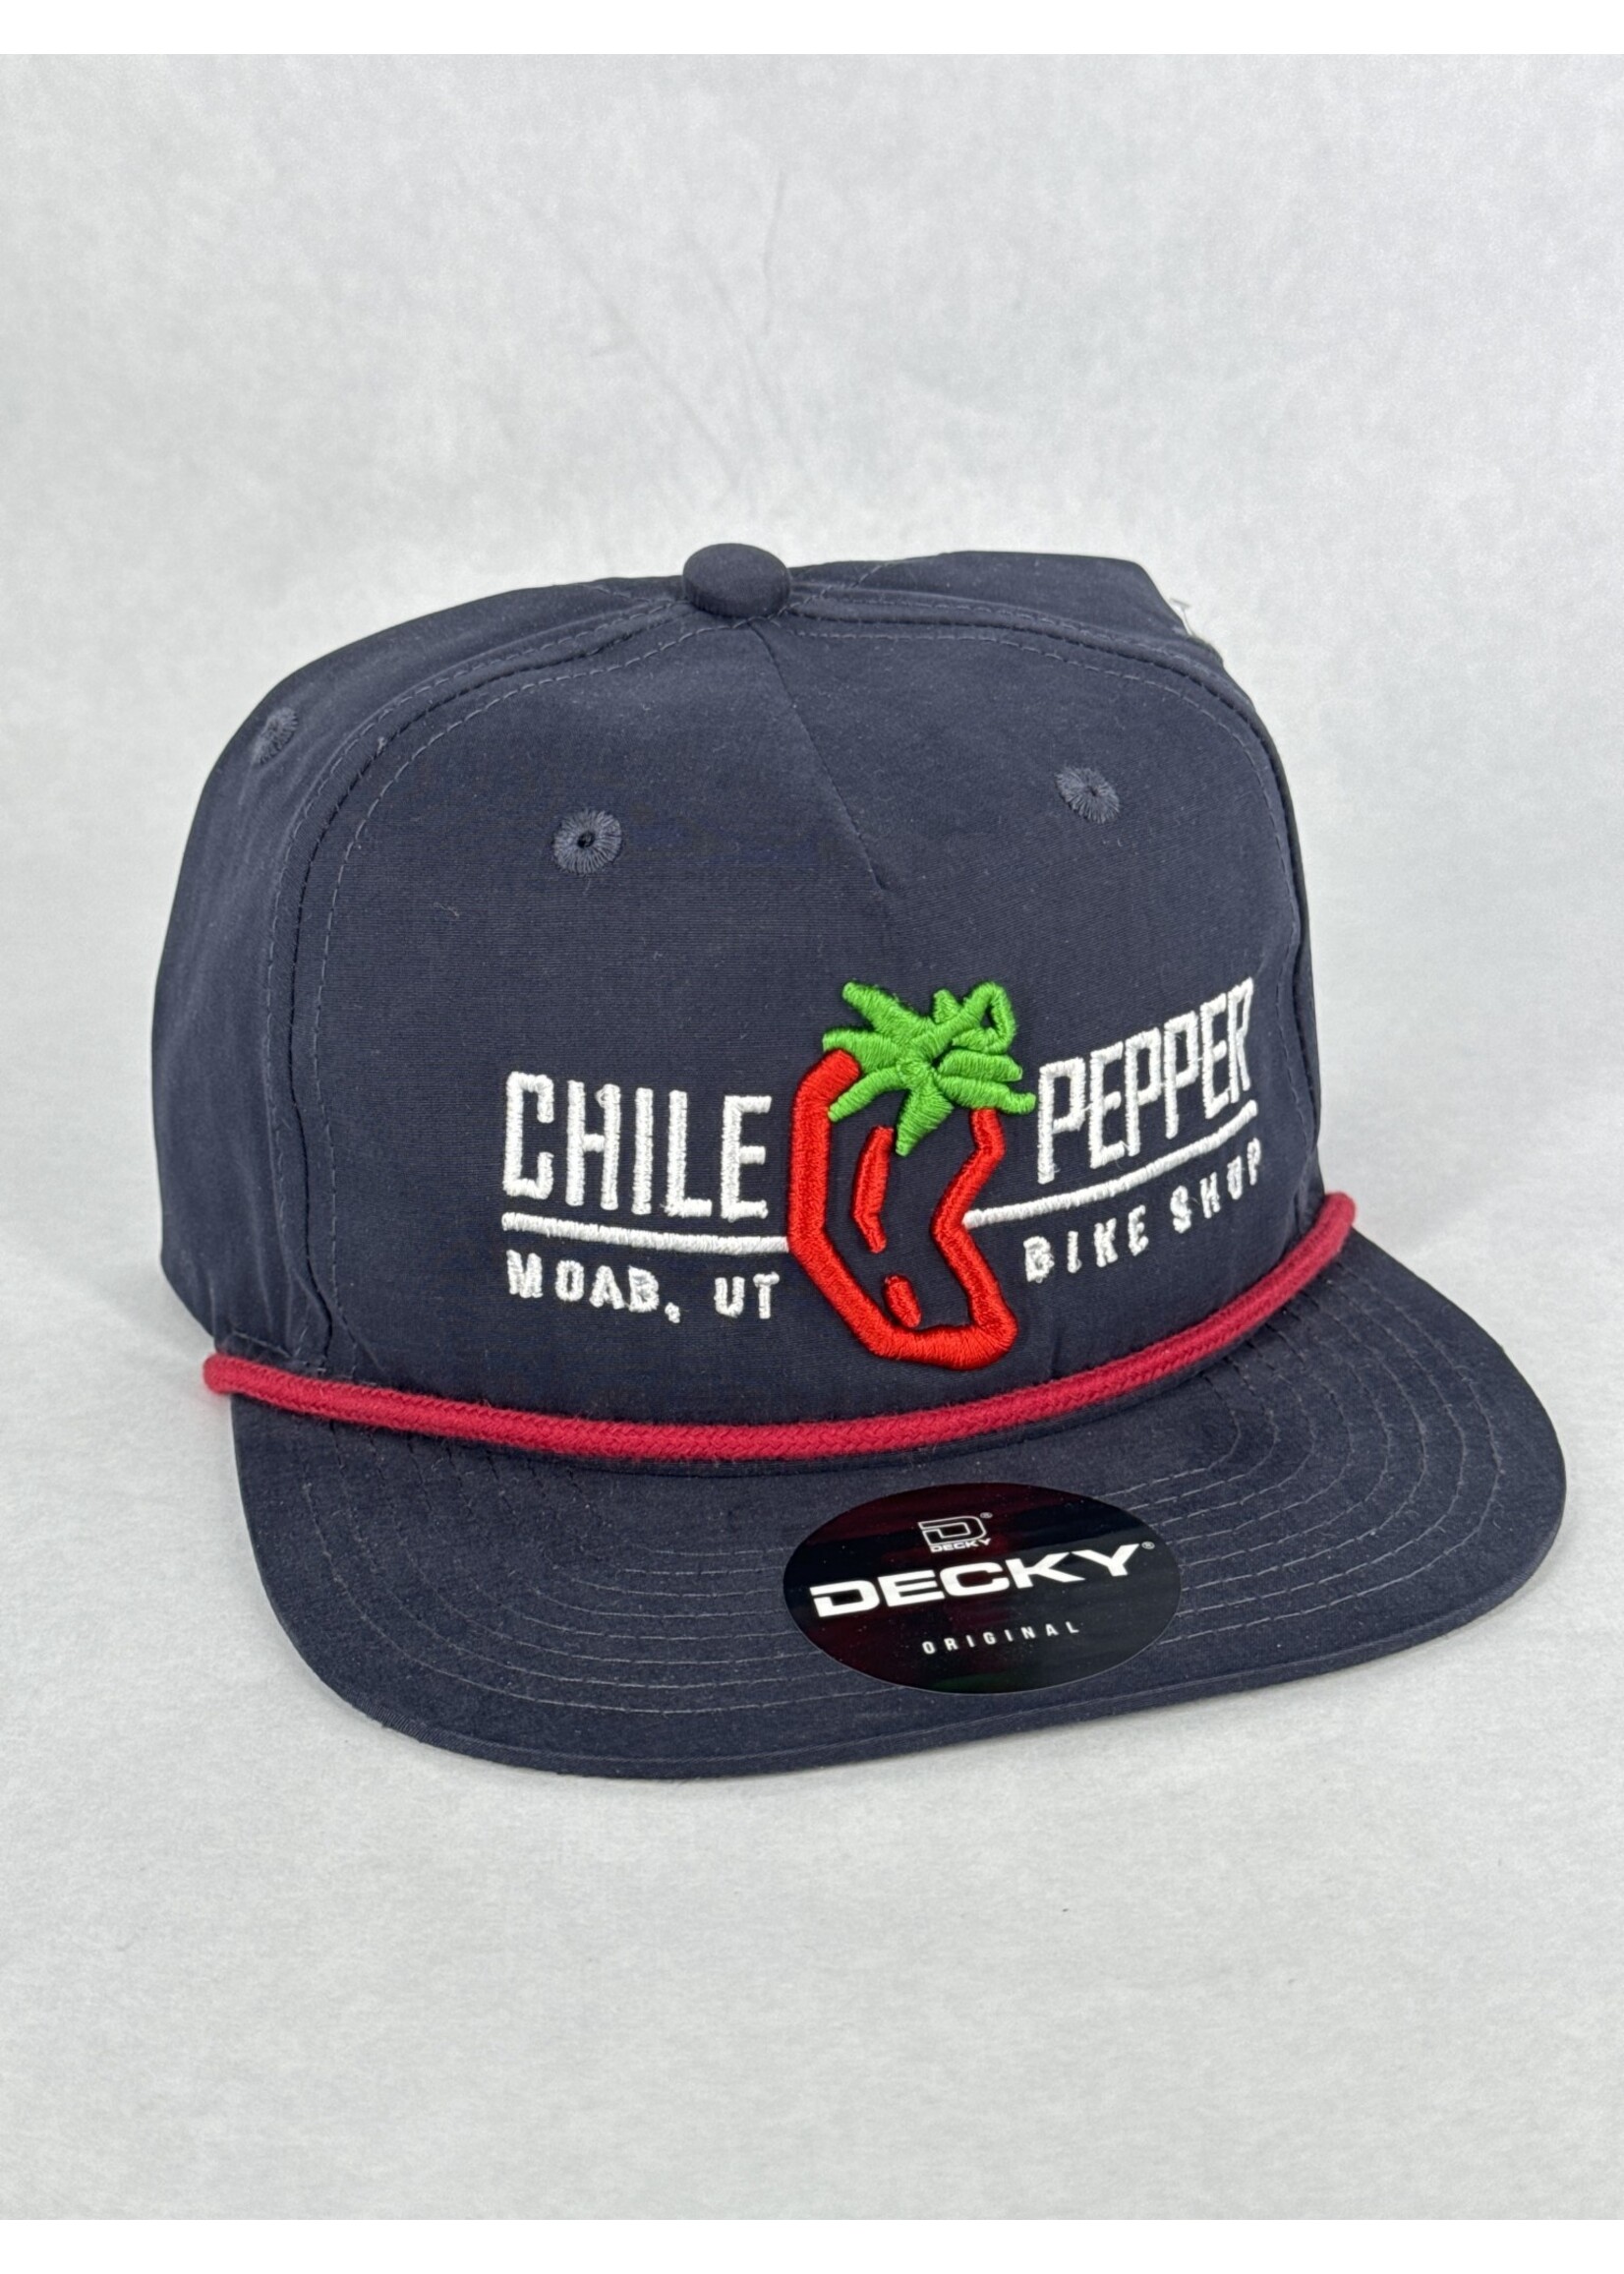 Chile Pepper Chile Pepper - Puff Embroidery - Adult Hat